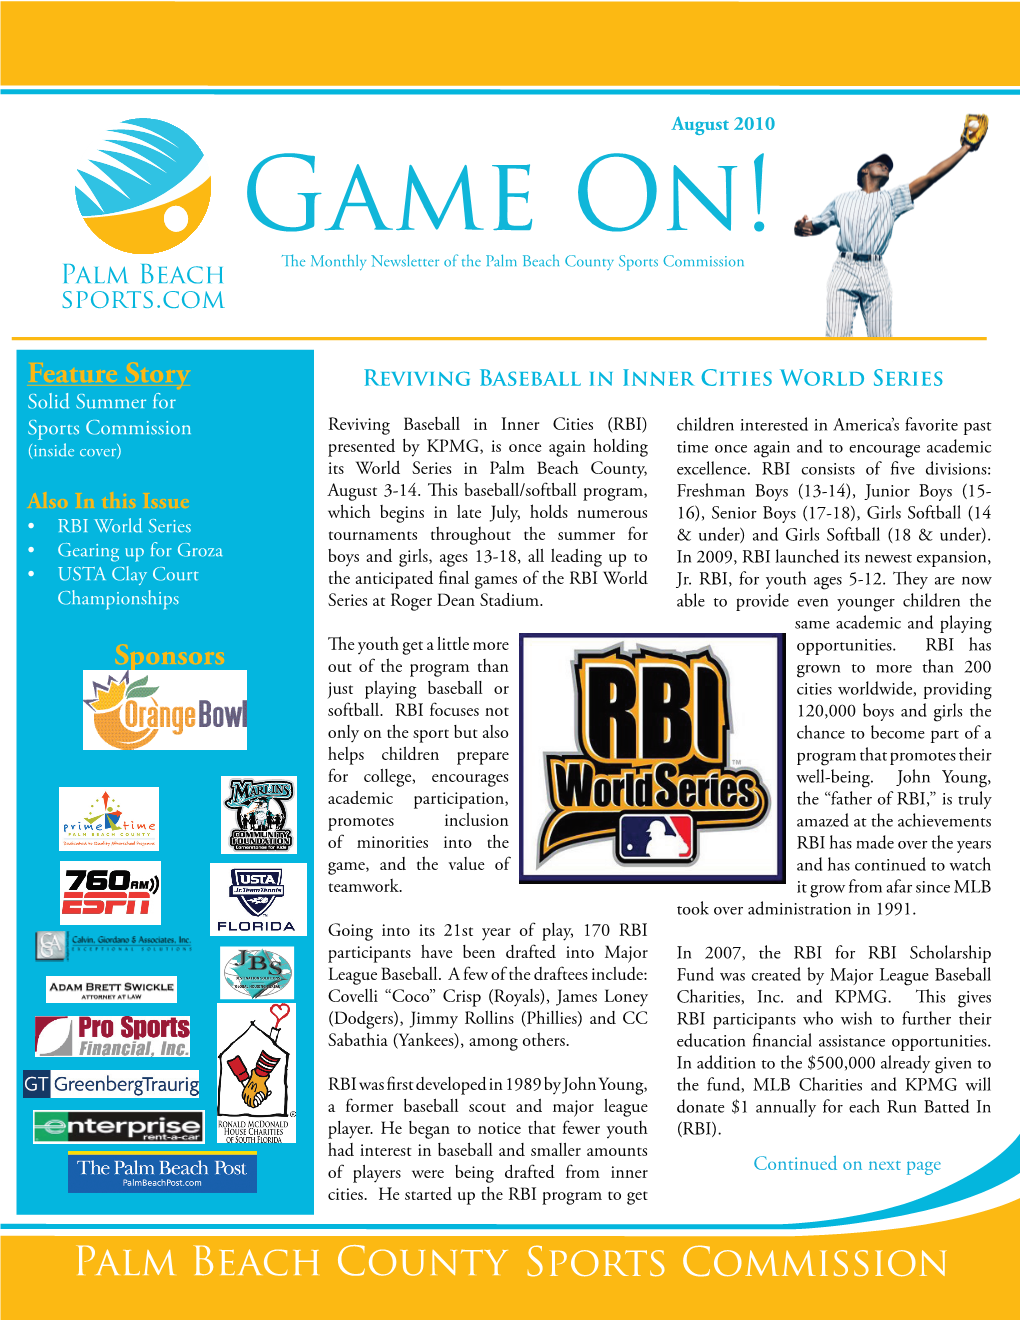 Game On! the Monthly Newsletter of the Palm Beach County Sports Commission